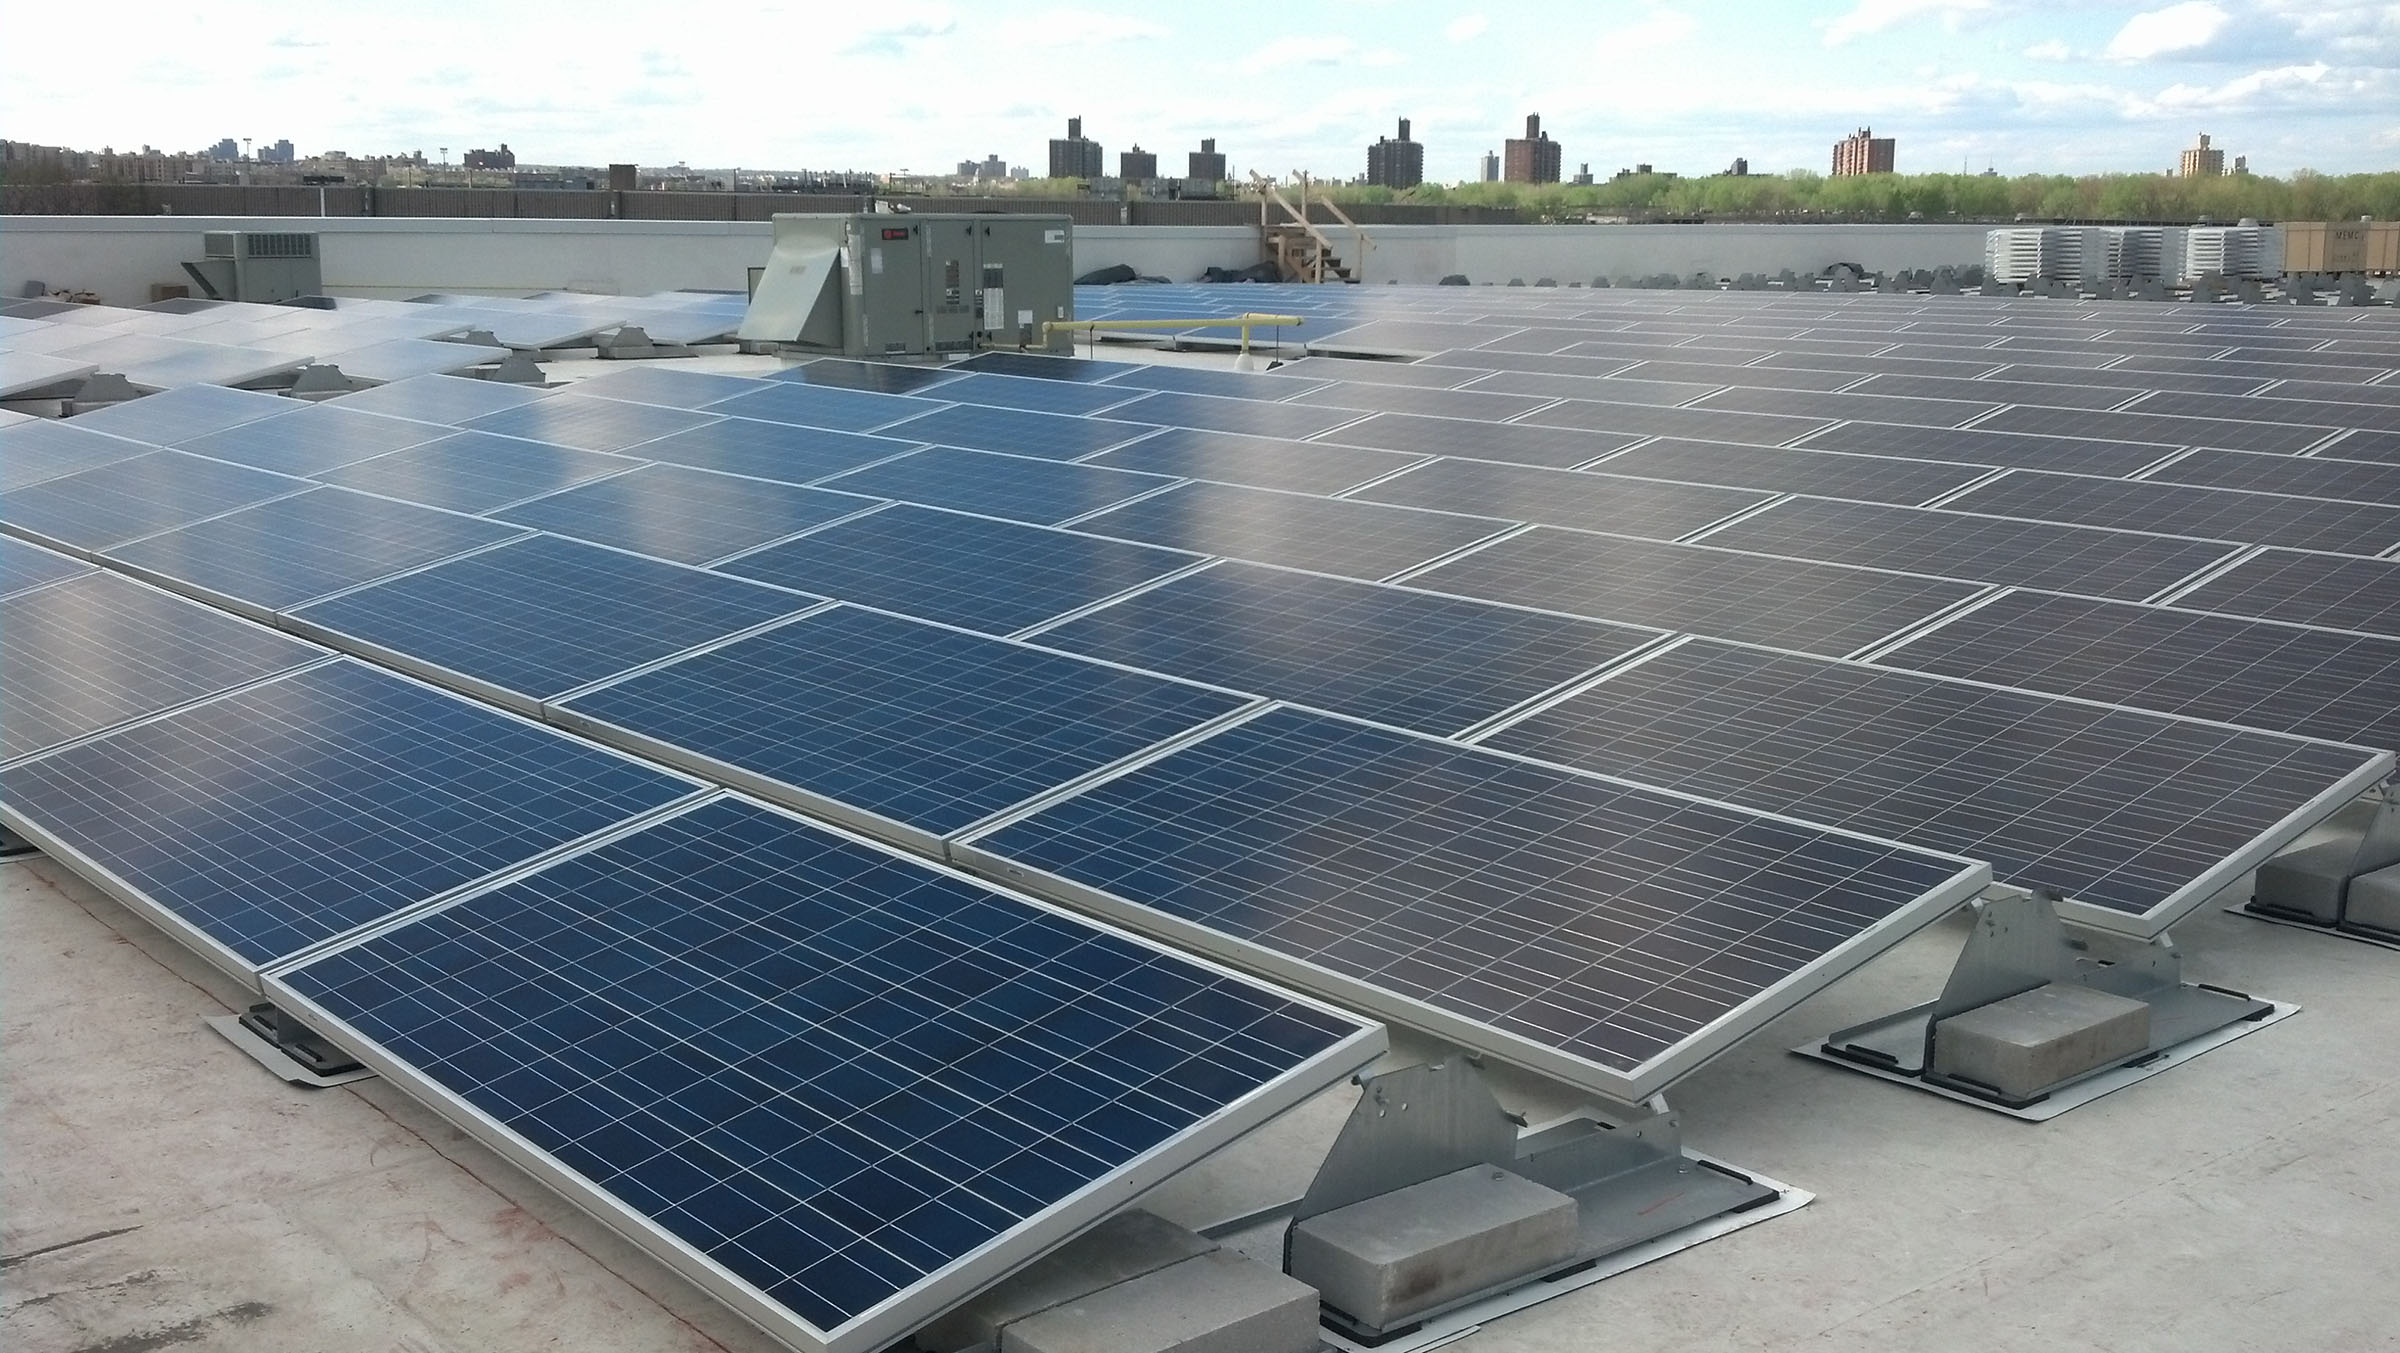 Enabling commercial scale rooftop solar PV 